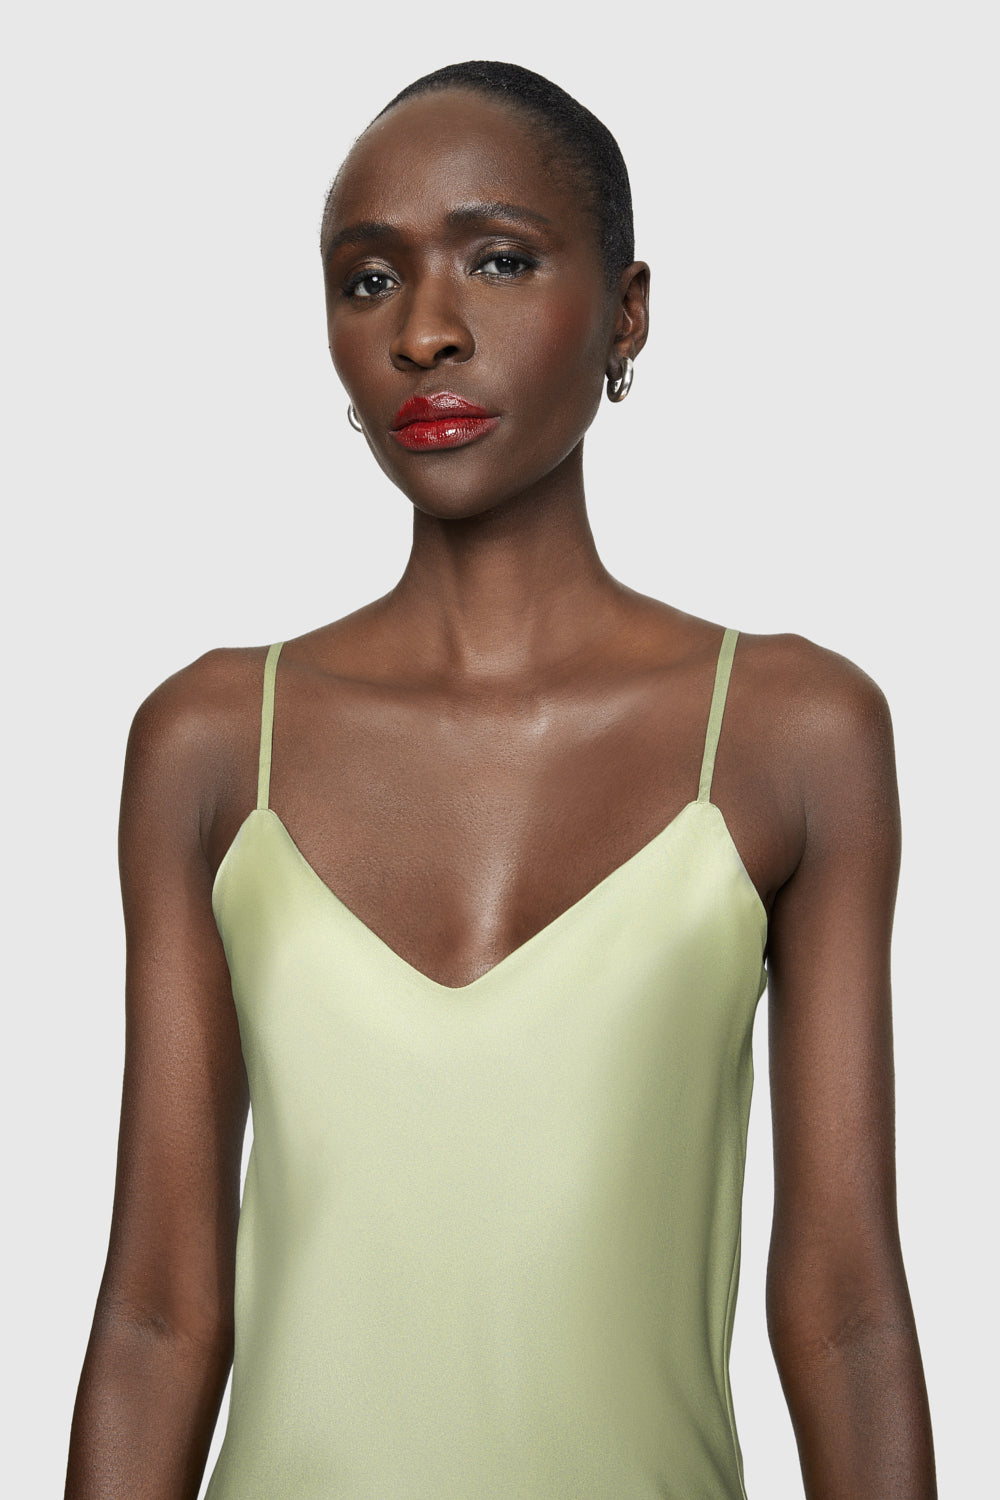 V-neck Camisole Top - Mint green - Ladies